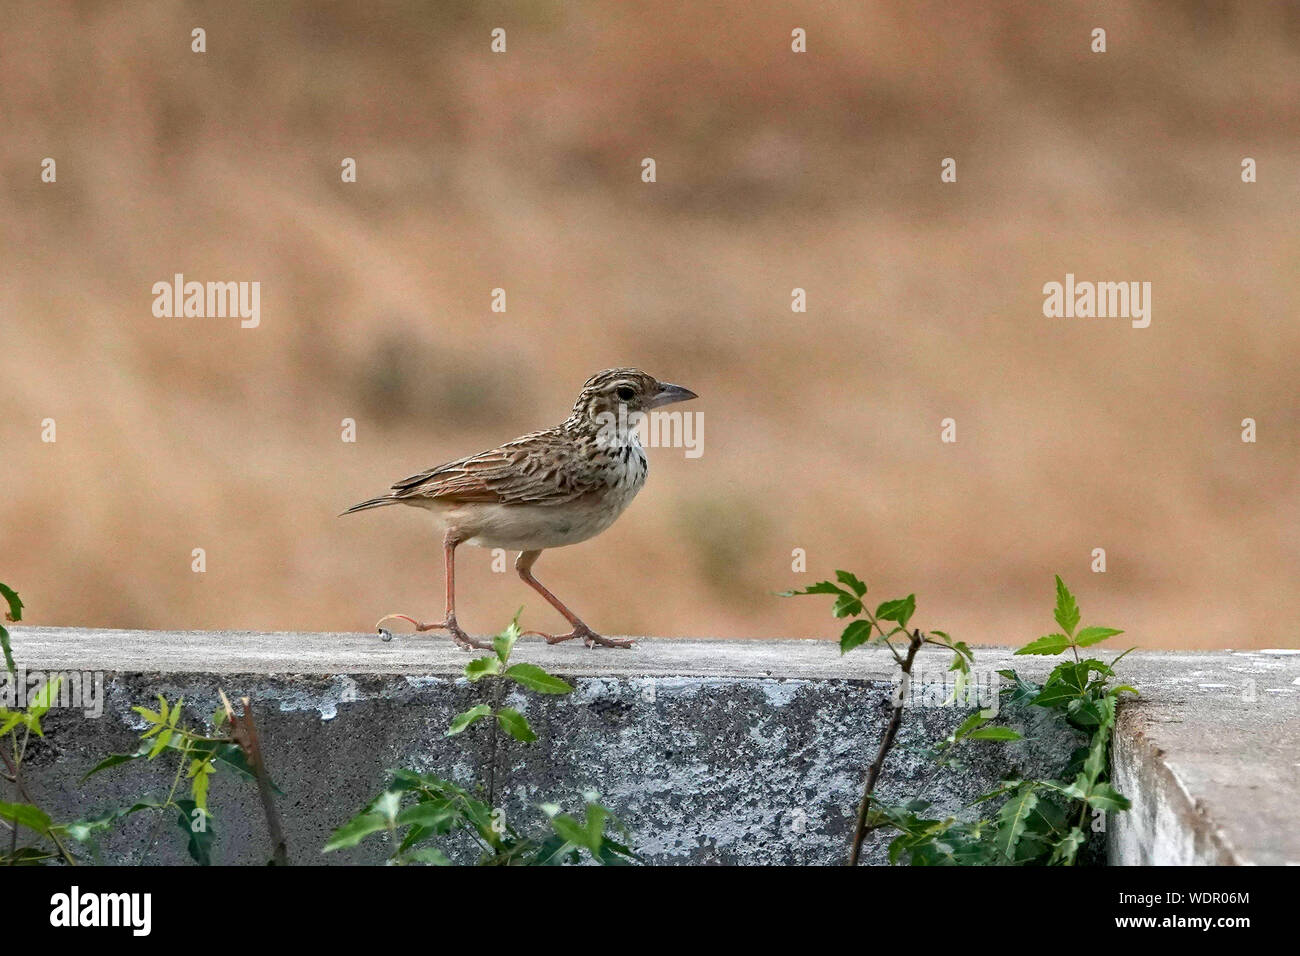 The Indian bush lark or Mirafra erythroptera is a species of lark in the family Alaudidae found in South Asia. Clicked this in its natural habitat. Stock Photo